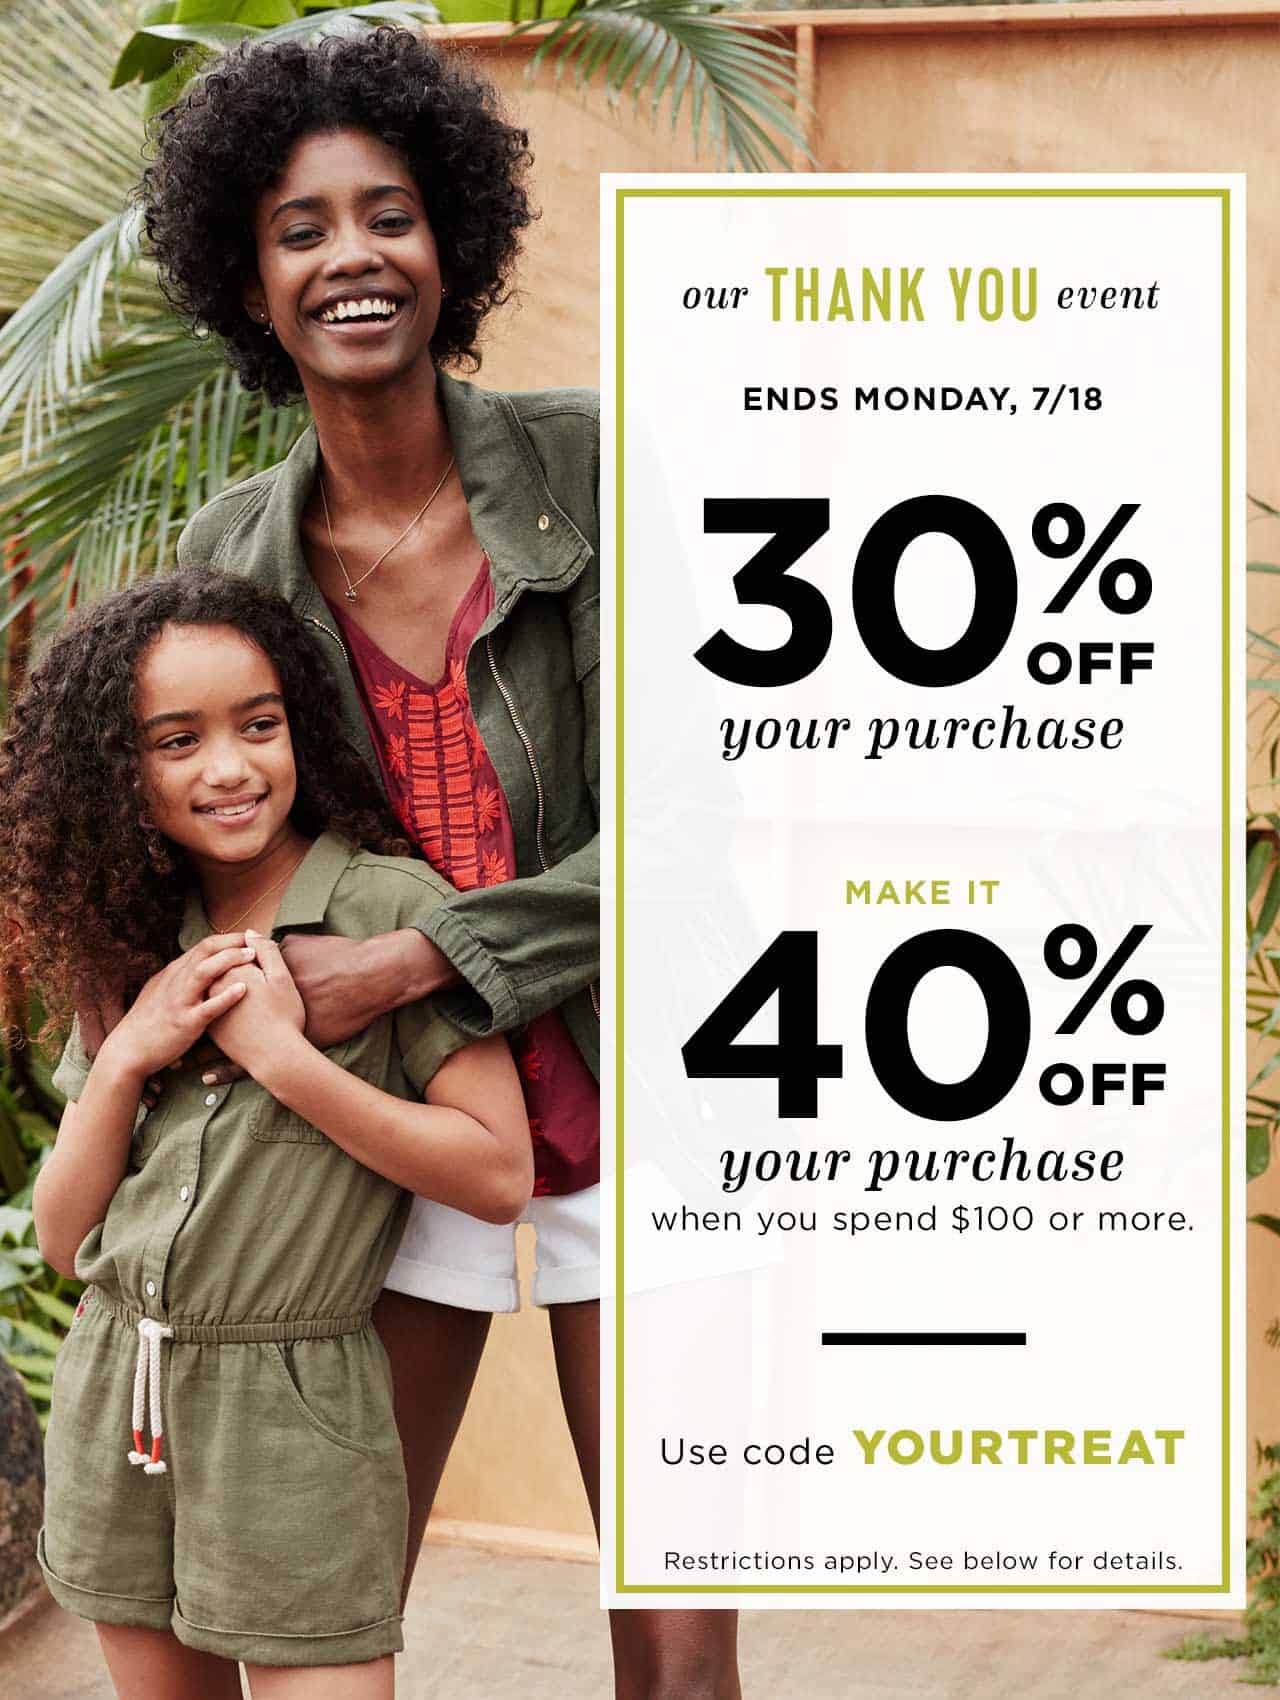 old-navy-coupon-code-save-up-to-40-off